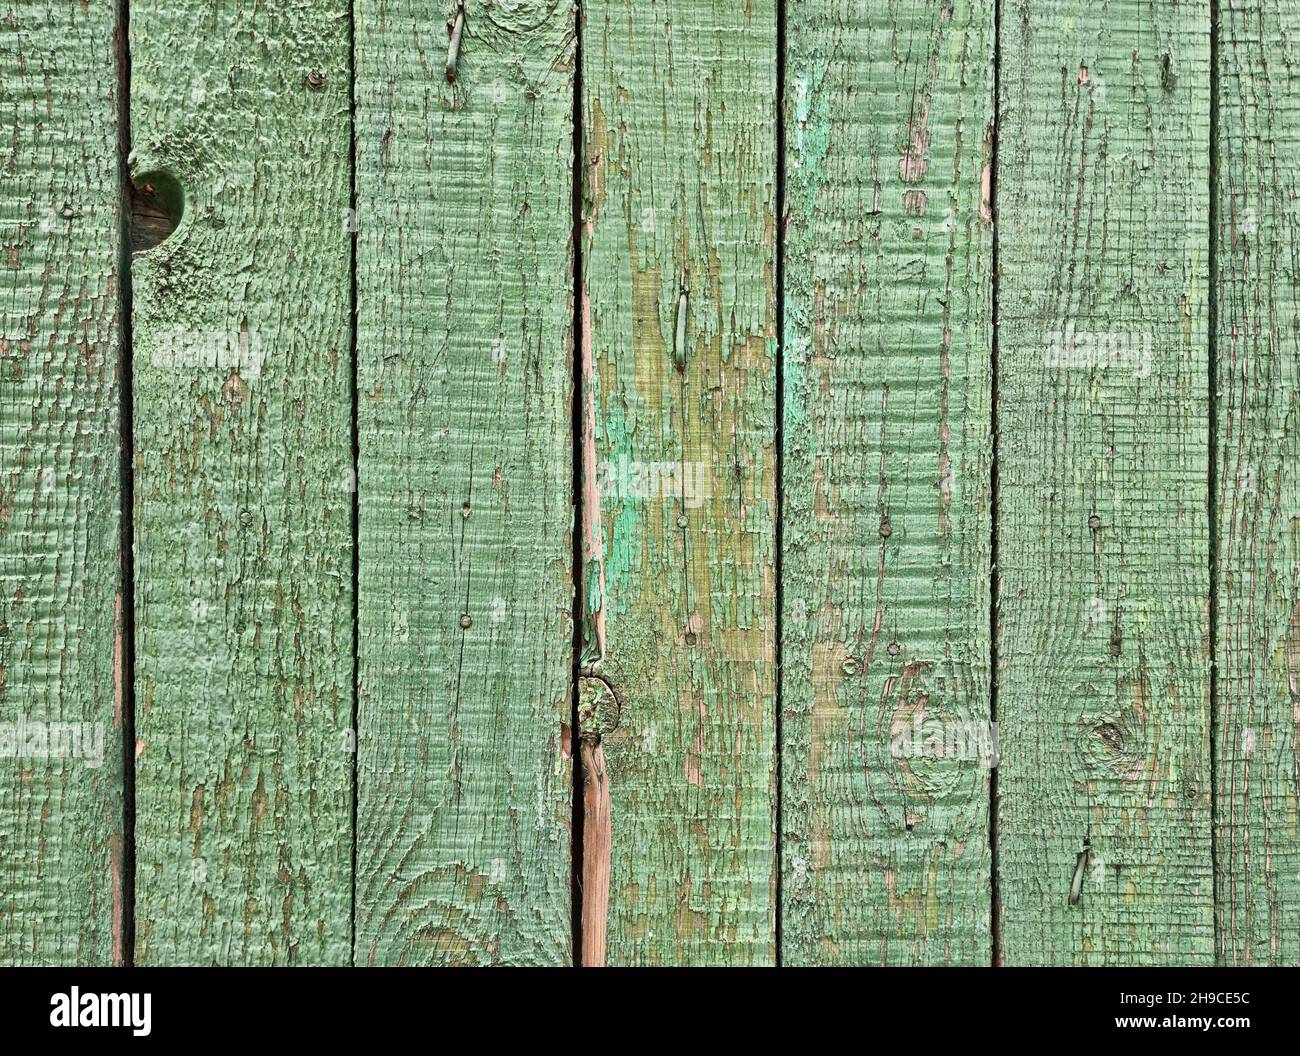 Rough old wooden planks painted in green color as texture background Stock Photo